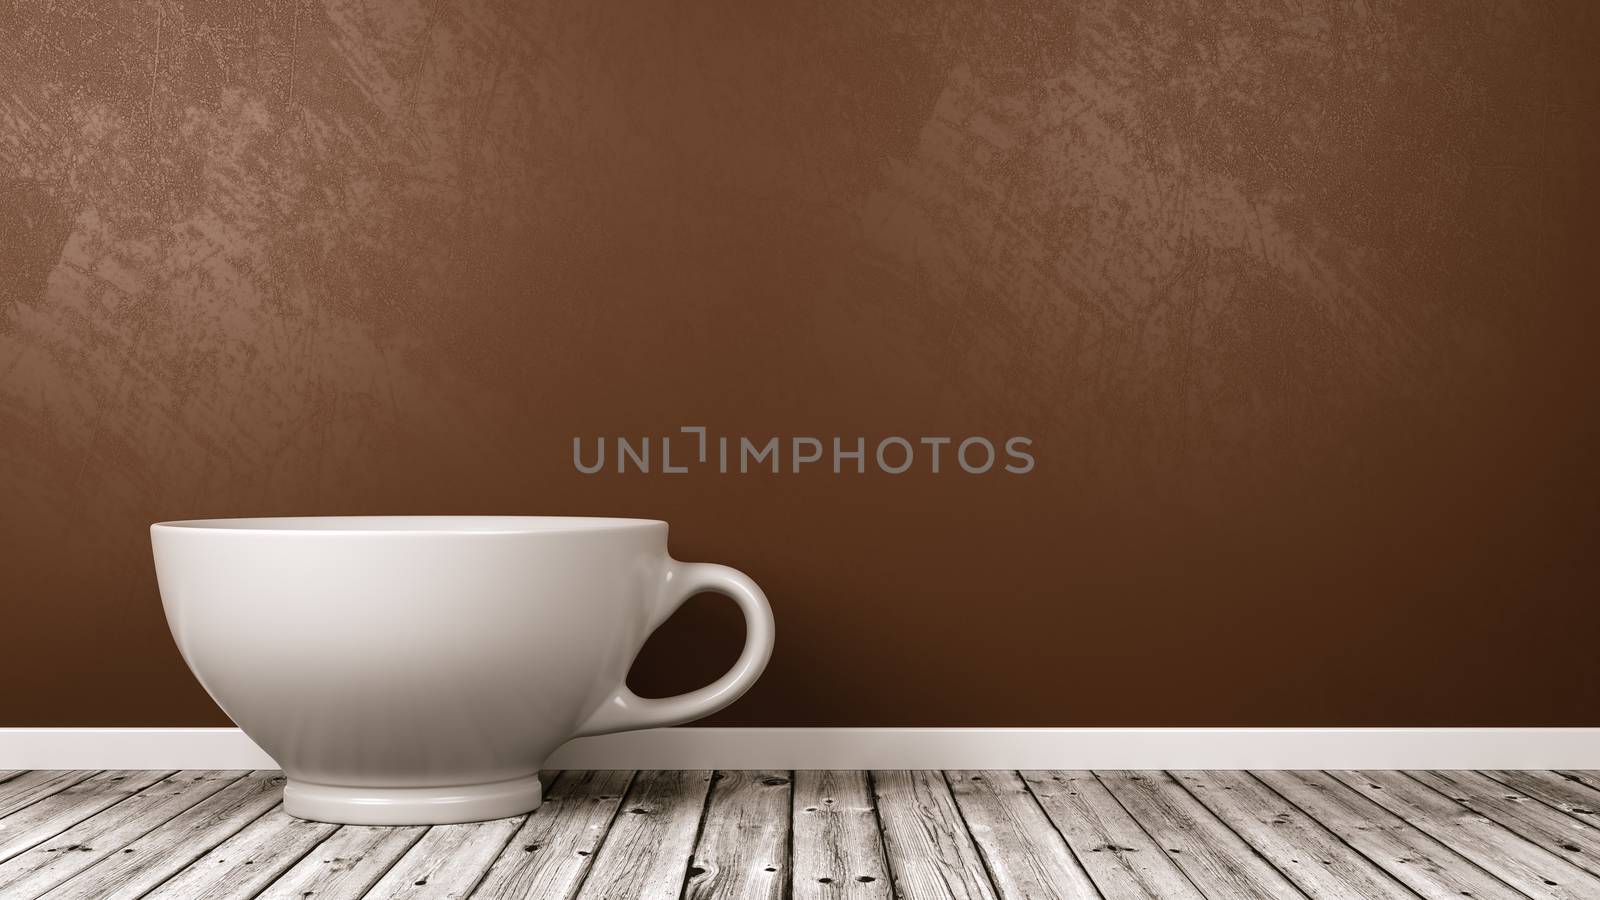 White Ceramic Breakfast Cup on Wooden Floor Against Brown Wall with Copy Space 3D Illustration